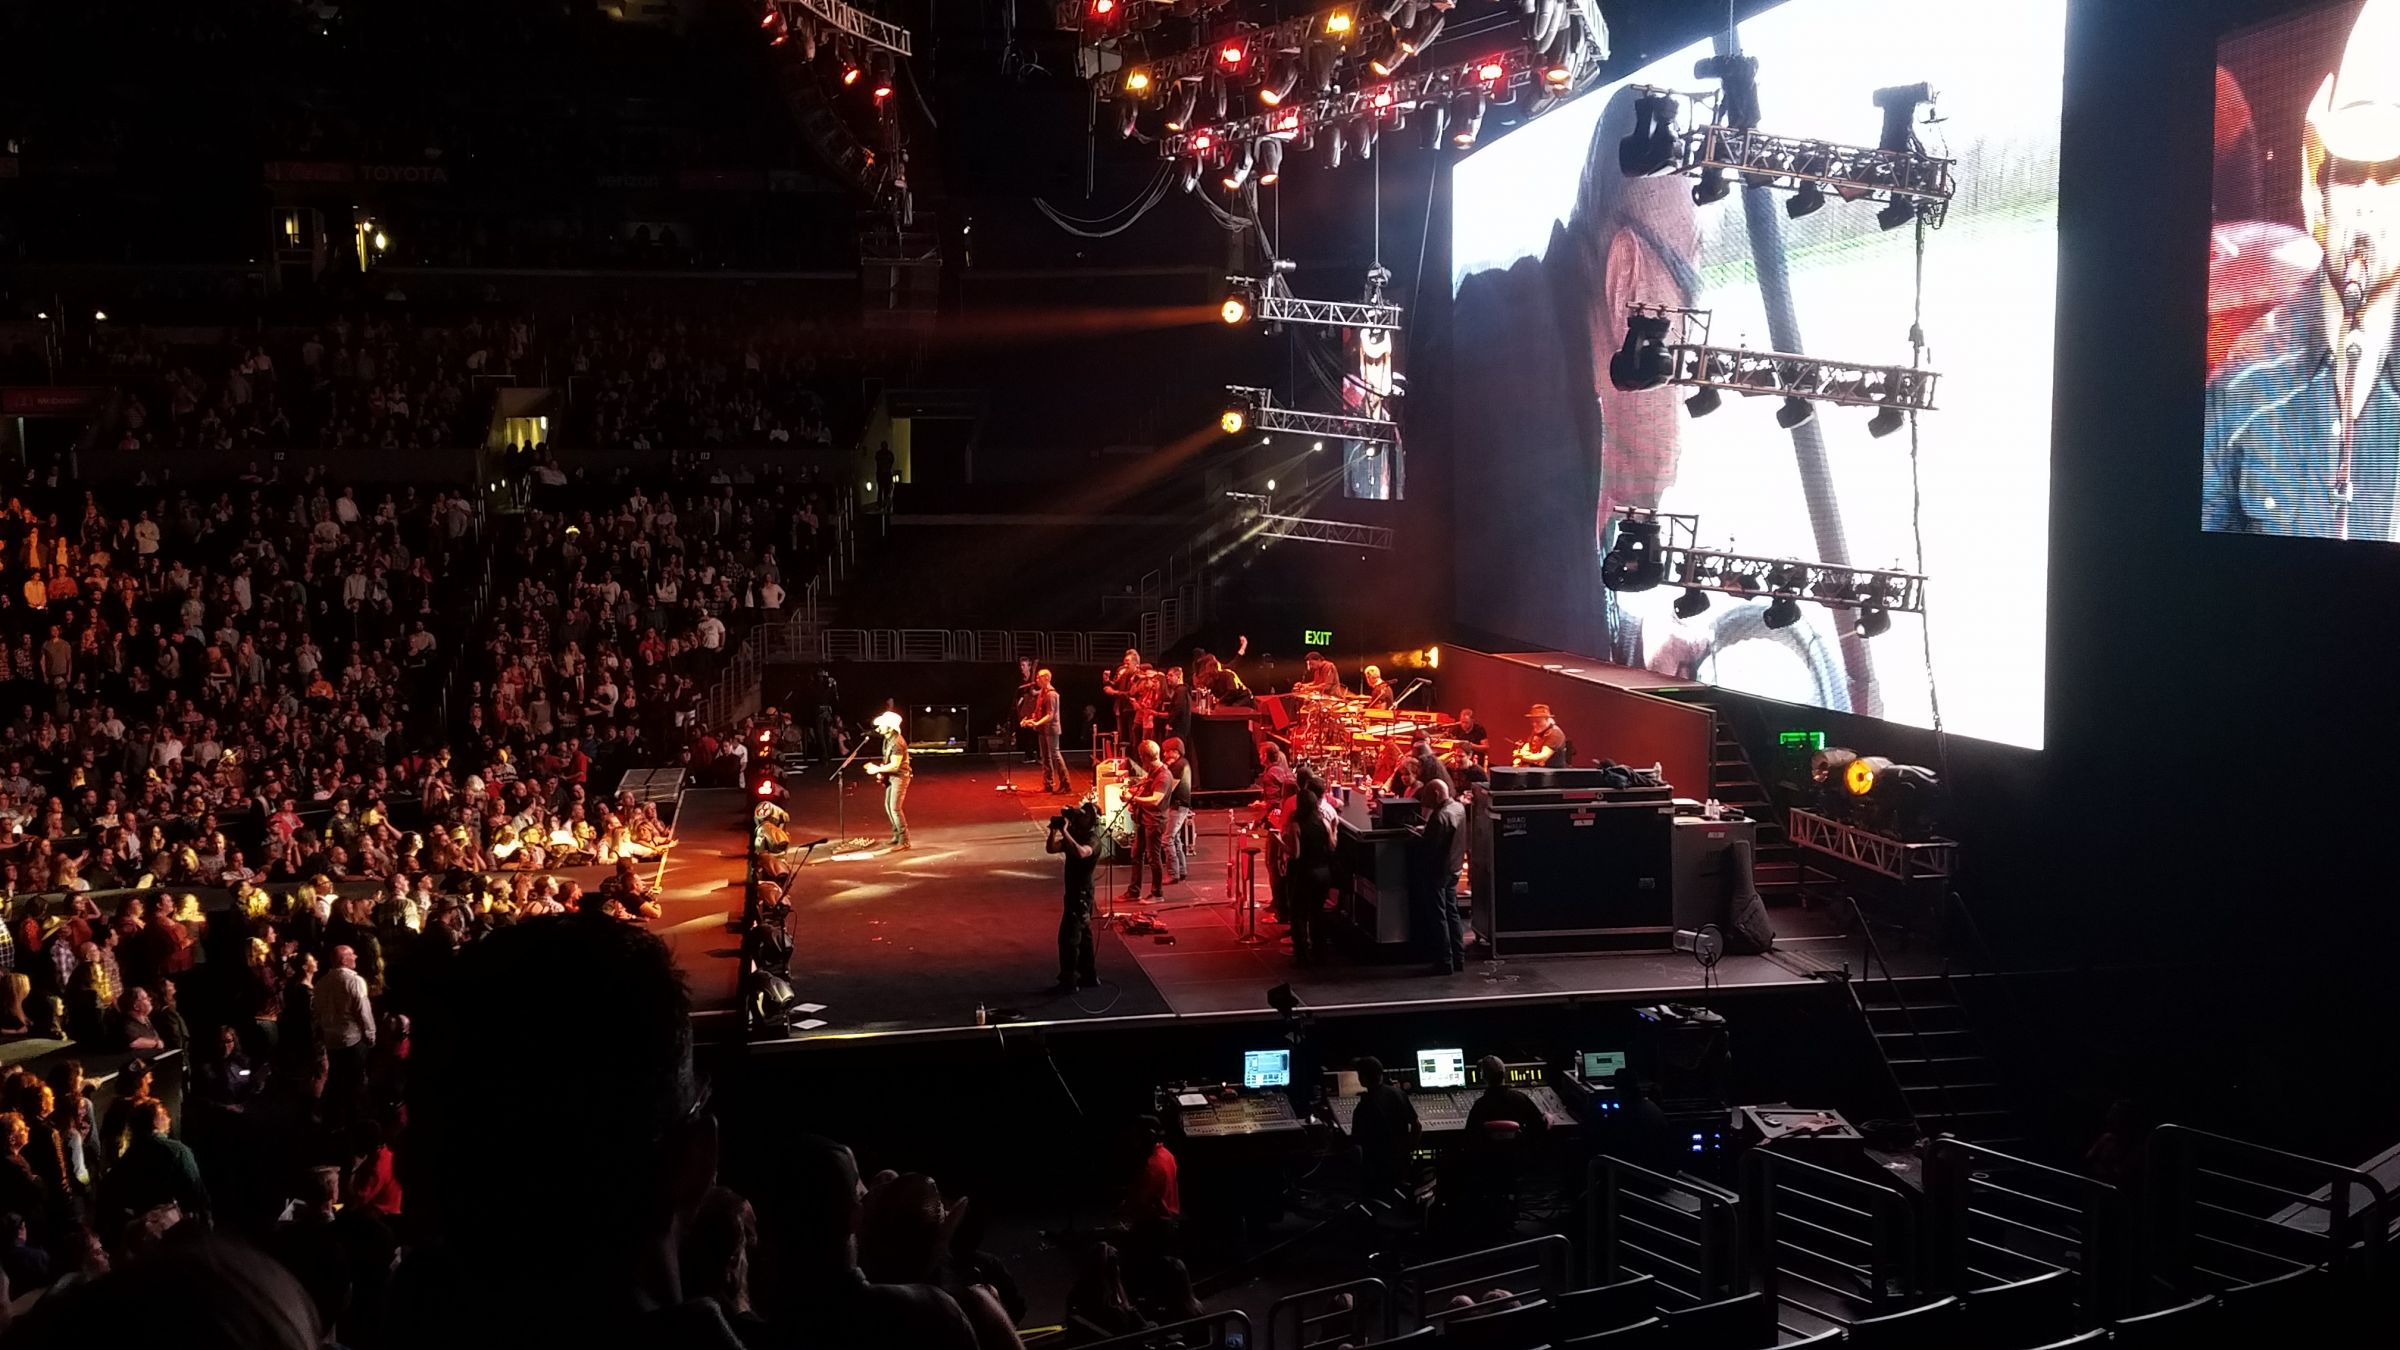 section 118, row 19 seat view  for concert - crypto.com arena